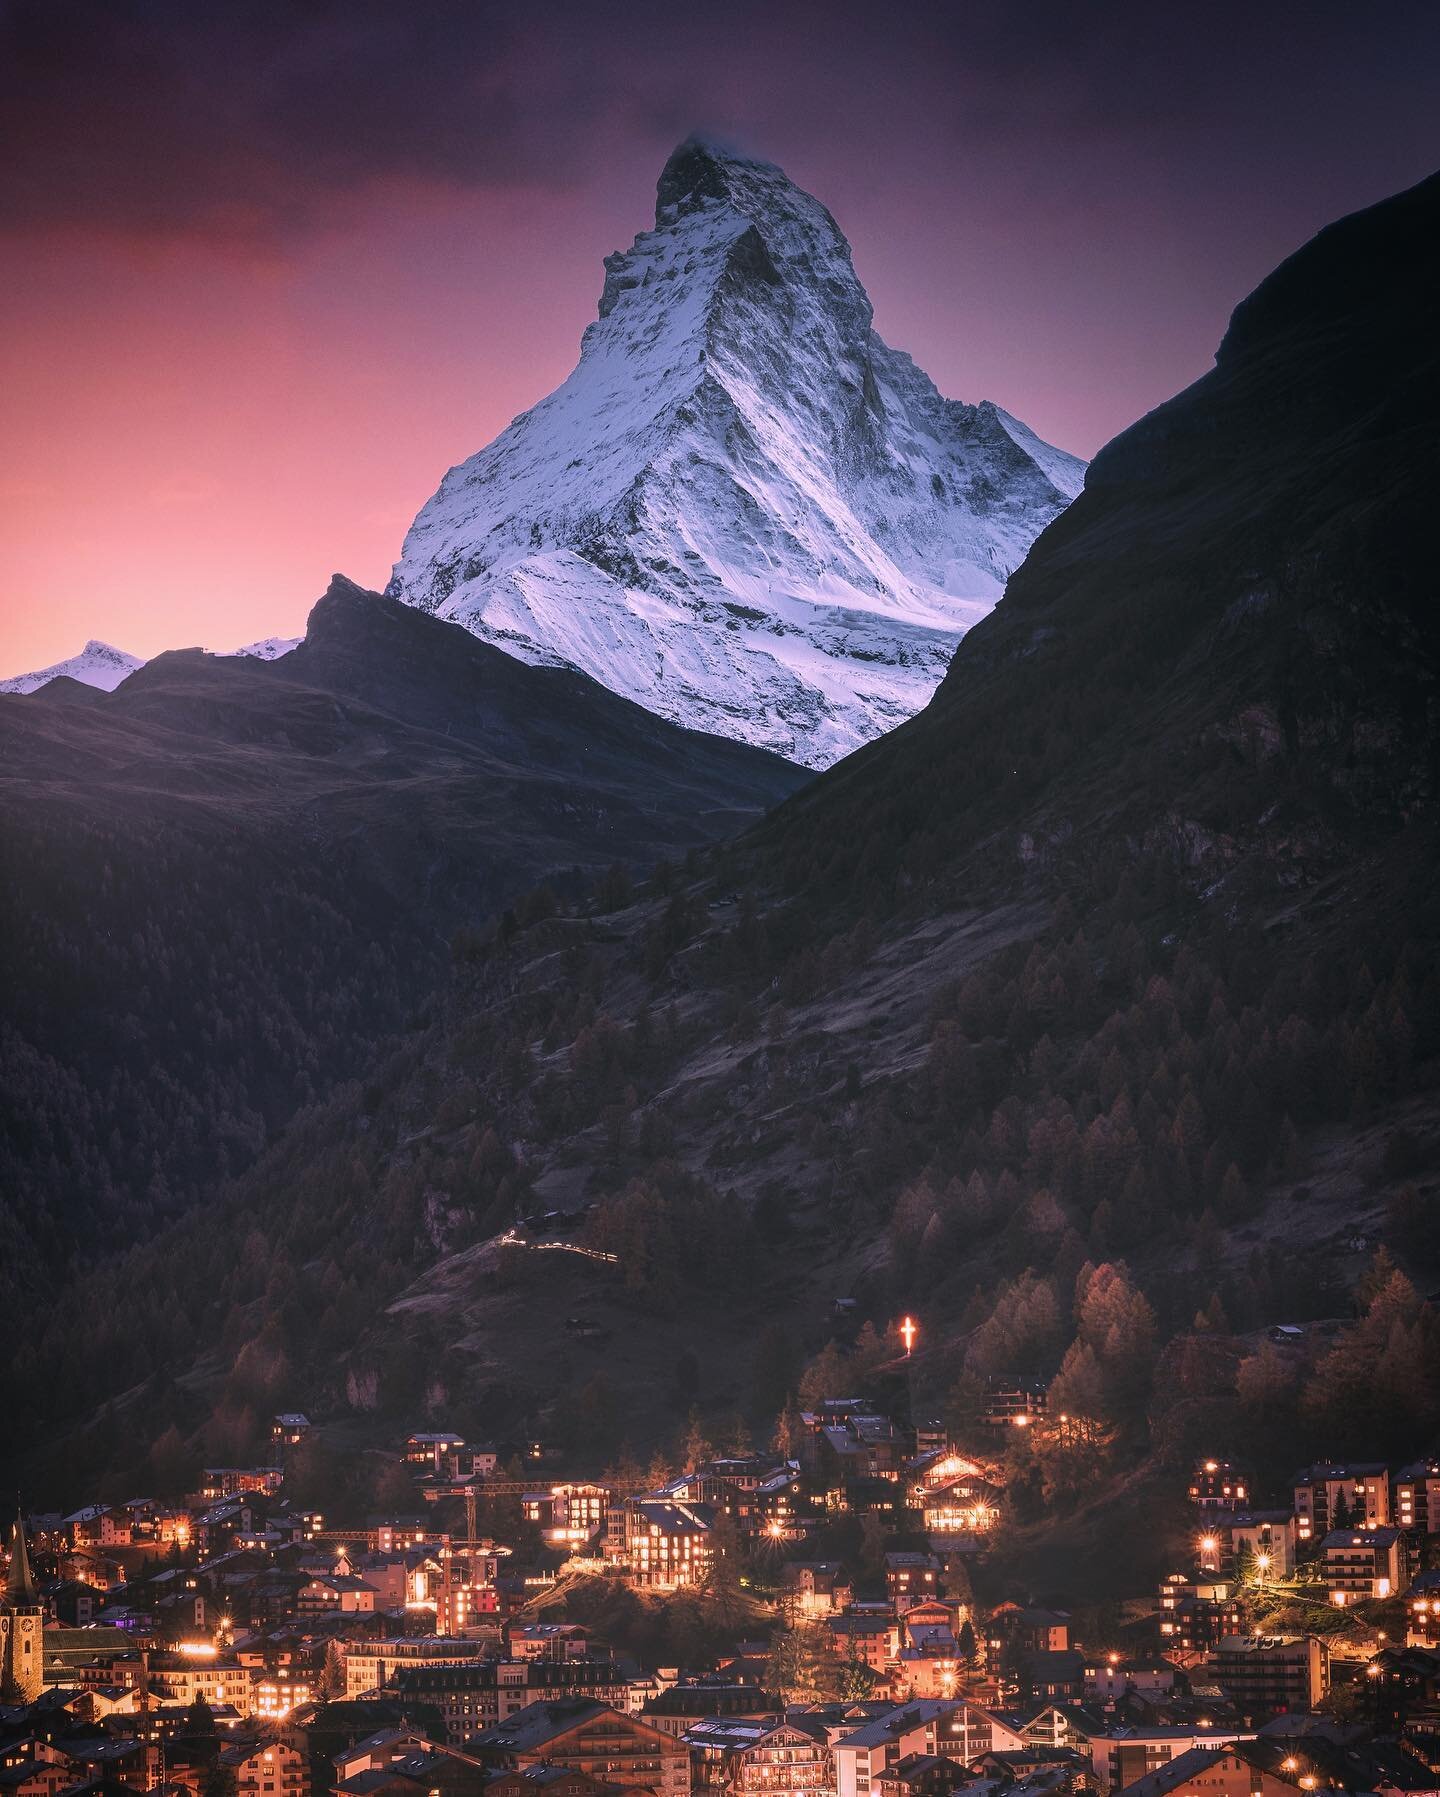 New Blog Post 🏔️ Switzerland!

In September last year I finally realised a dream I&rsquo;d had for many years and hopped on a plane to Switzerland. I had wanted to see the Matterhorn and the Swiss Alps for such a long time and ticking all these thin